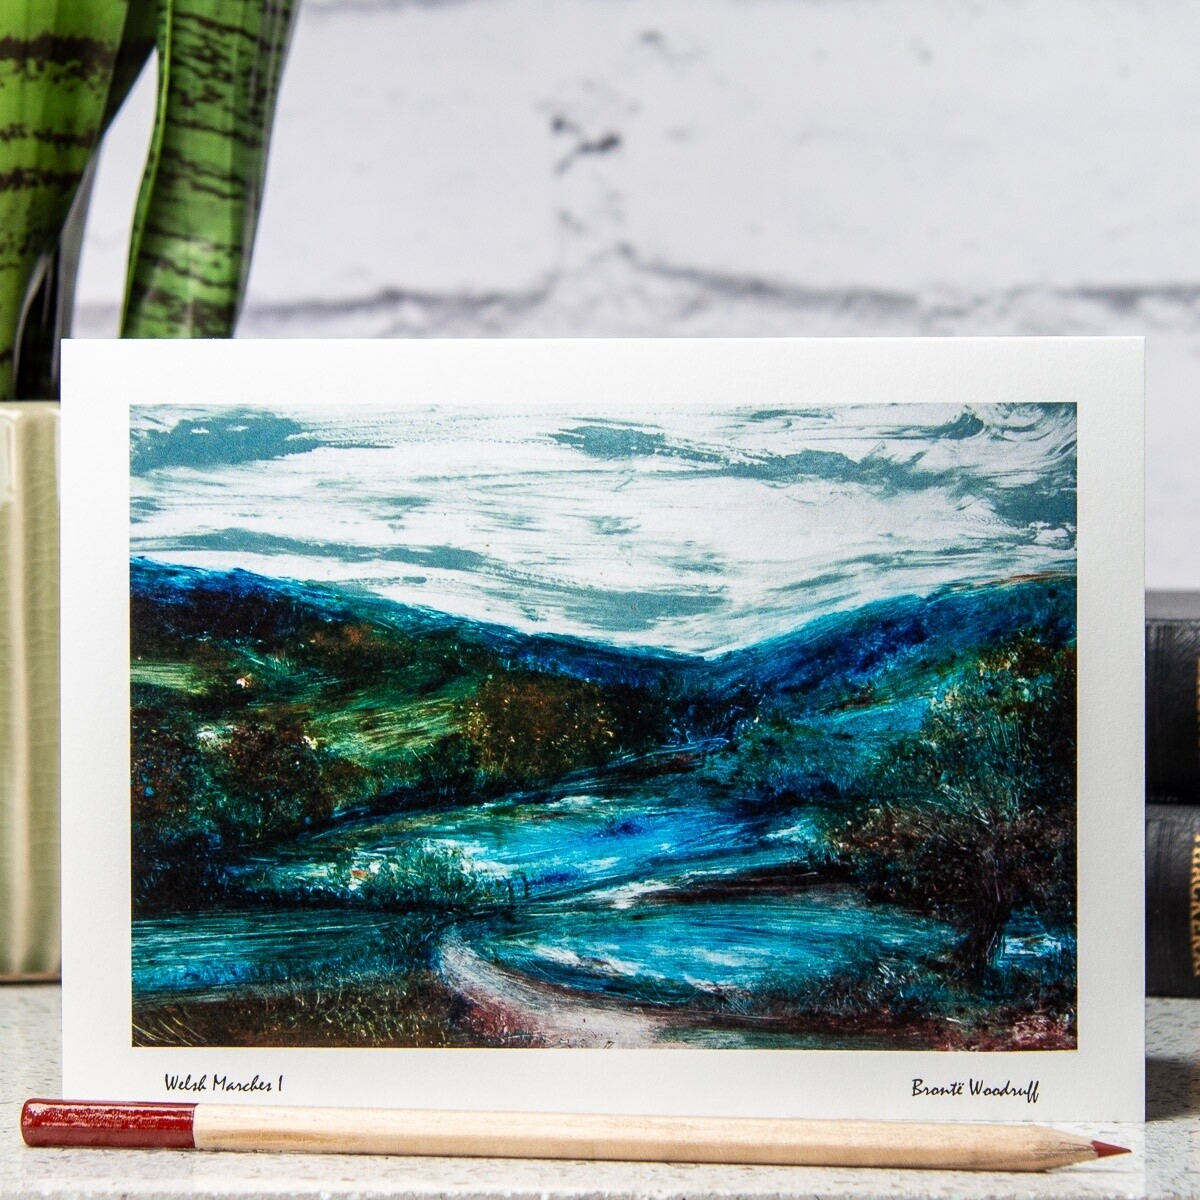 Welsh Marches I Card by Bronte Woodruff